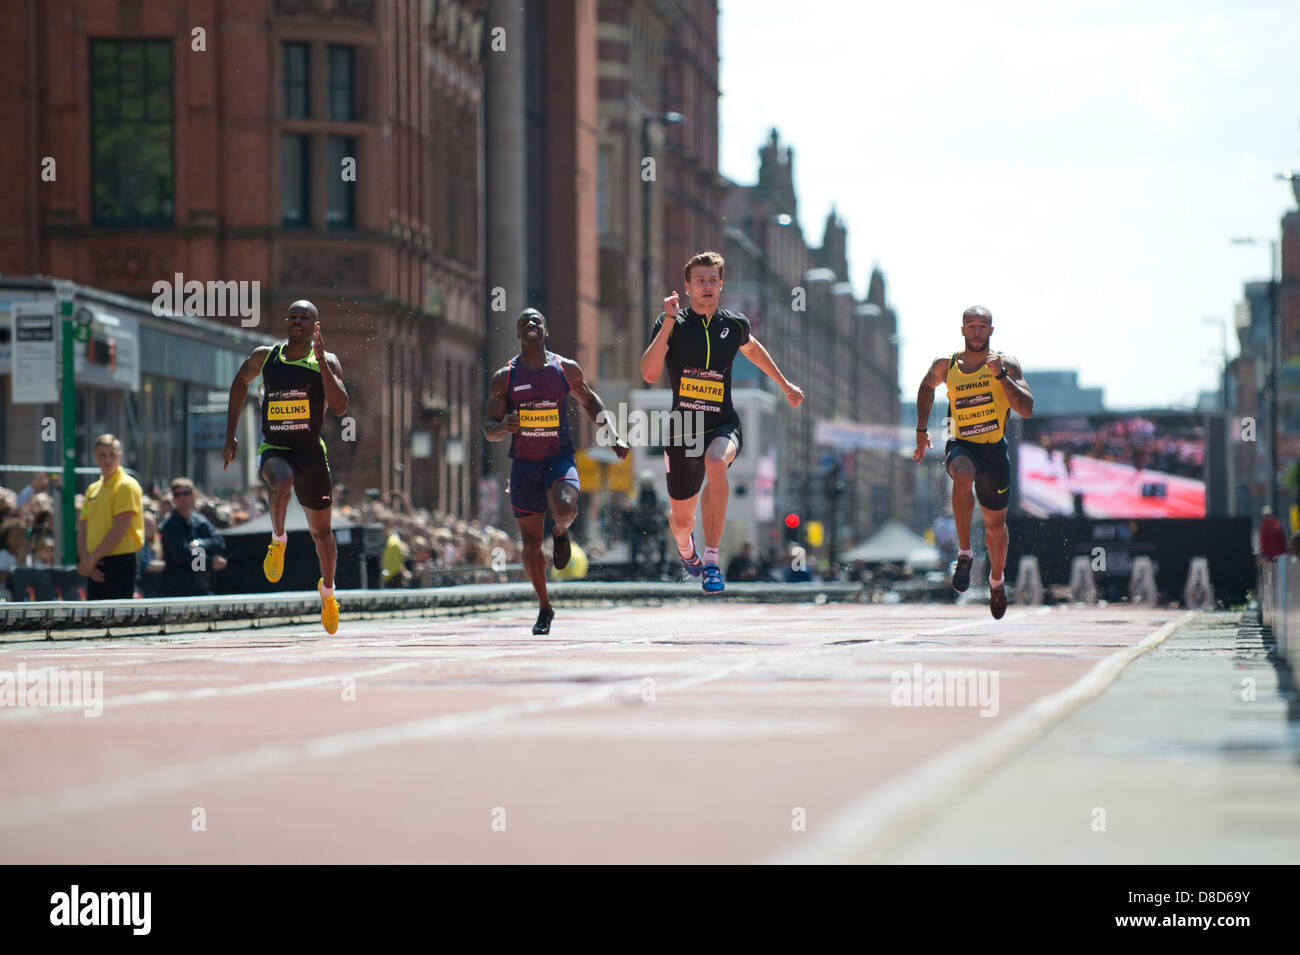 MANCHESTER, UK. 25th May 2013. Christophe Lemaitre (second right) of France sprints to take 1st place during the Mens 150m event in a time of 14.90 which took place on Deansgate in Manchester during the 2013 BT Great CityGames. The current 100m European Champion beat Kim Collins (Saint Kitts and Nevis, 2nd, furthest left), James Ellington (Great Britain, 3rd, furthest right) and Dwain Chambers (Great Britain, 4th, second left). Credit: News Shots North/Alamy Live News (Editorial use only). Stock Photo